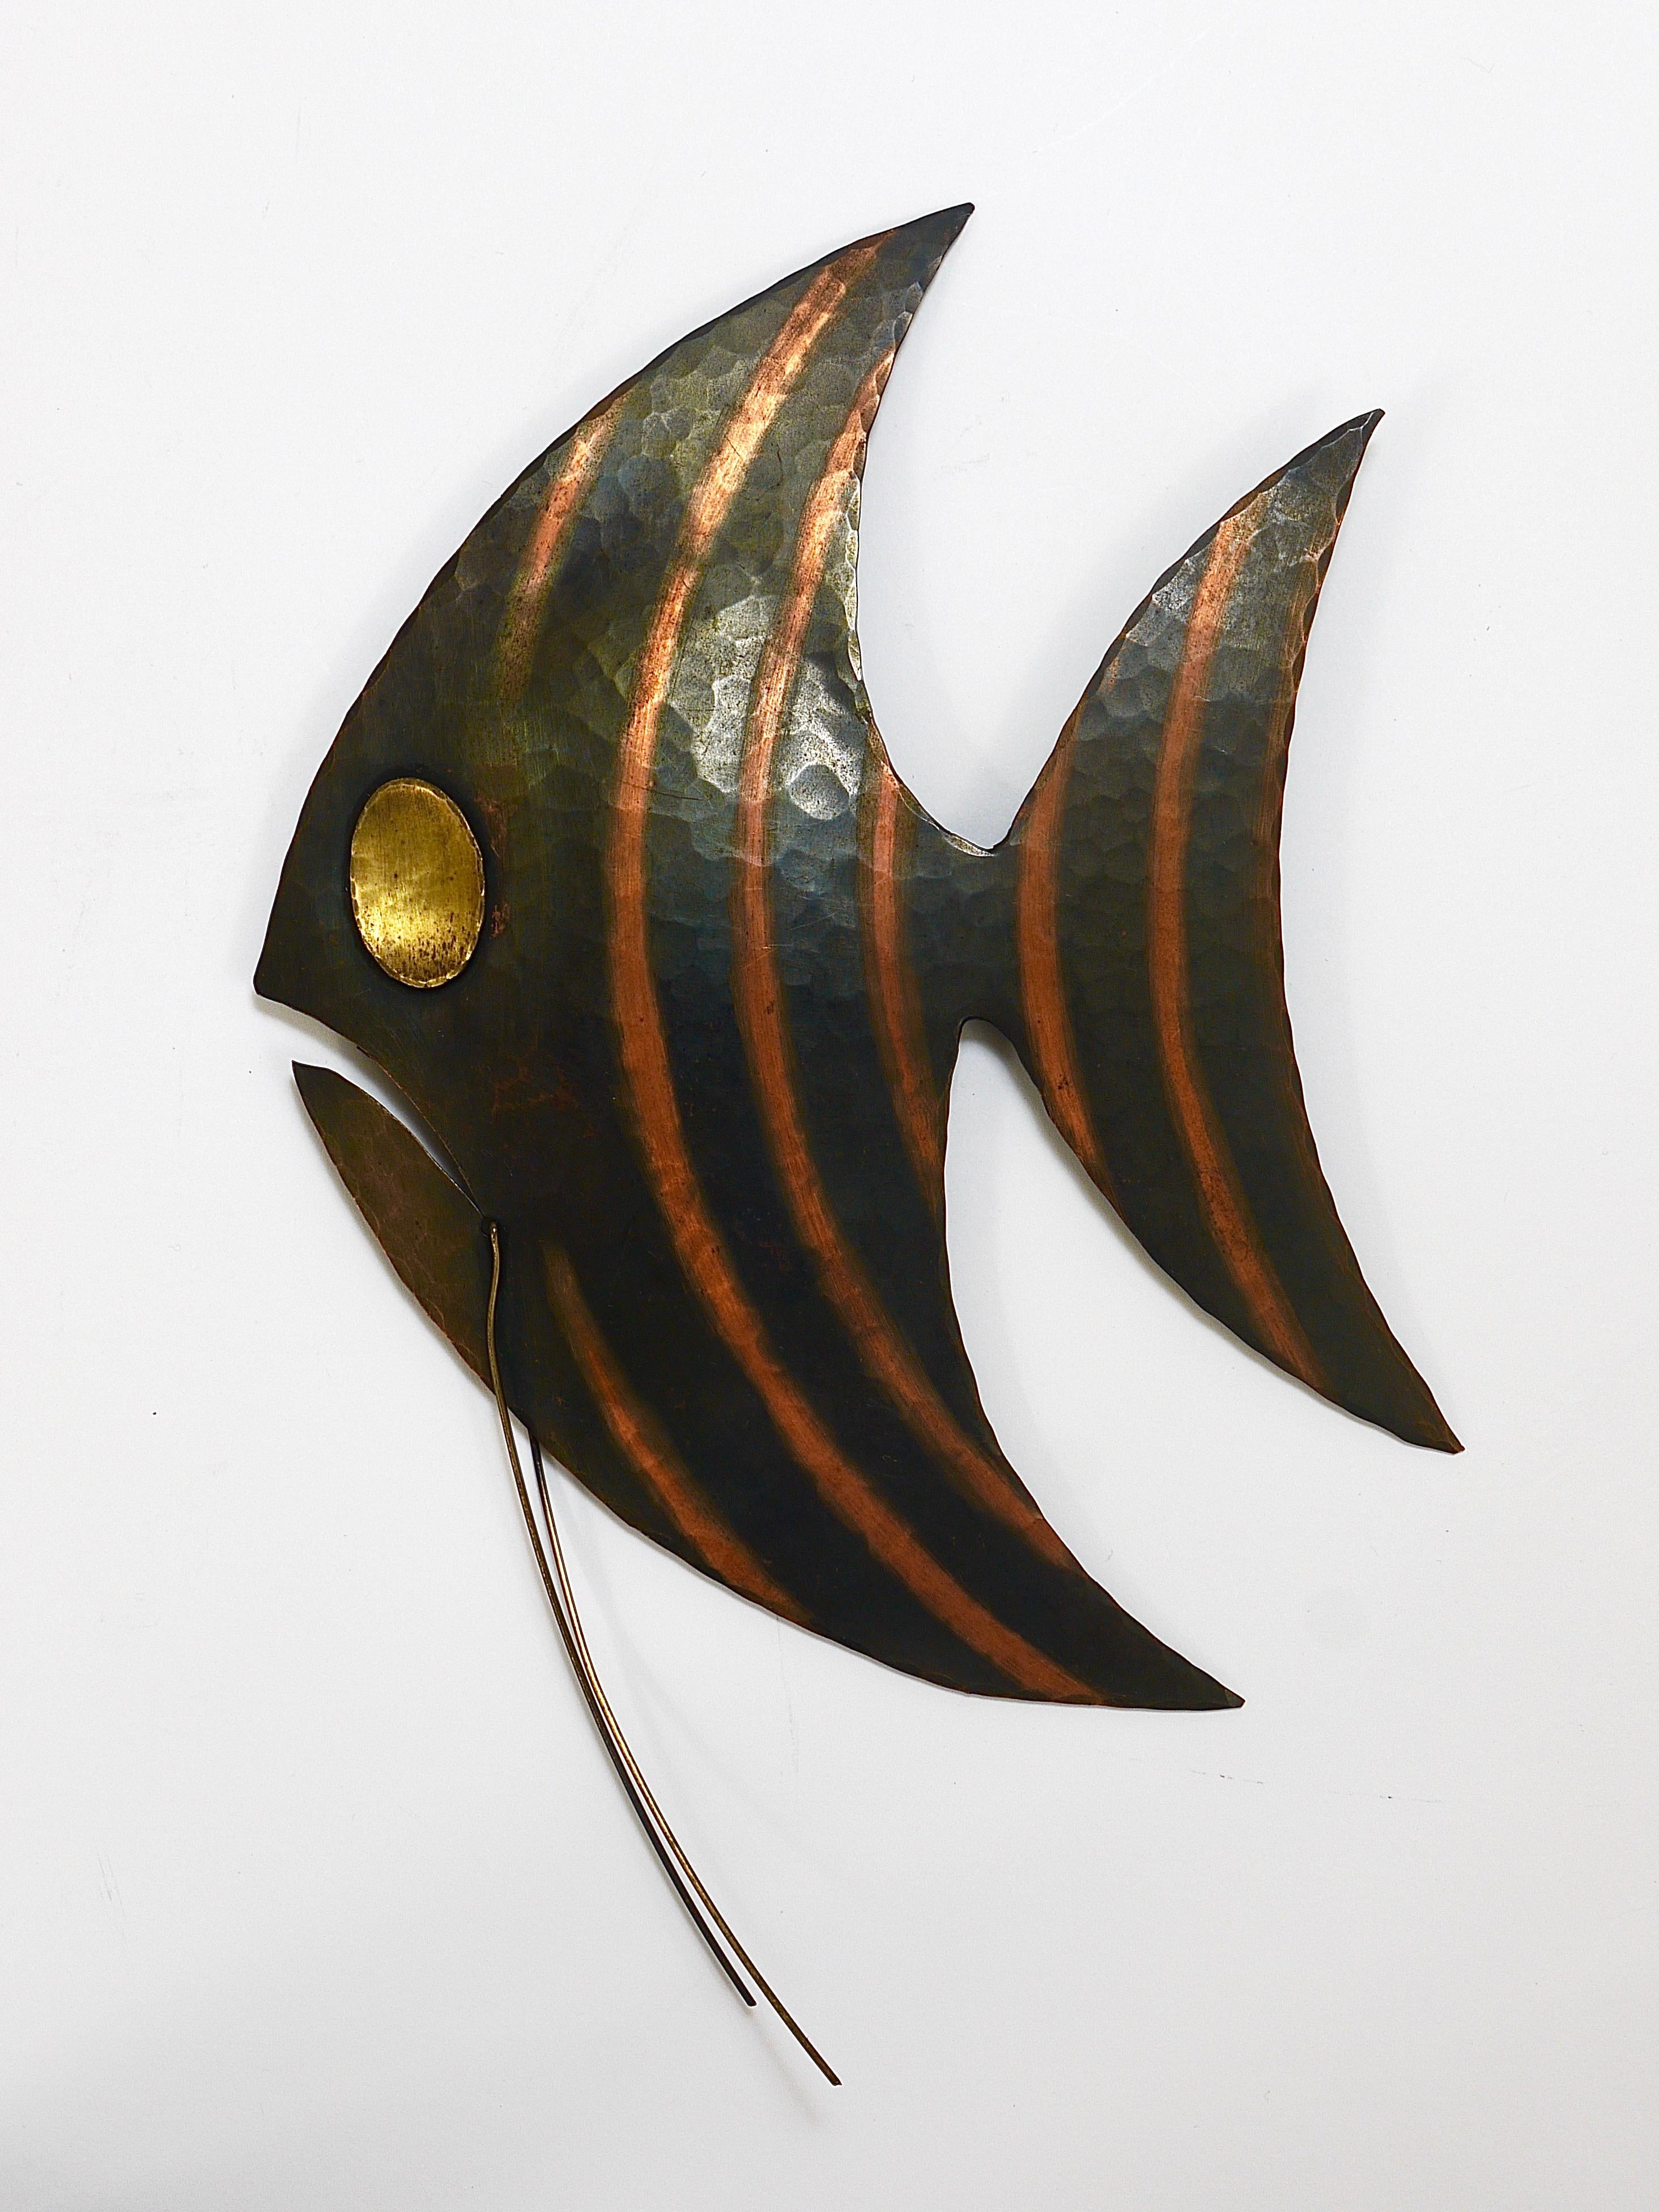 Blackened Midcentury Hammered Angel Fish Wall Plaque Sculpture, Copper, Austria, 1950s For Sale